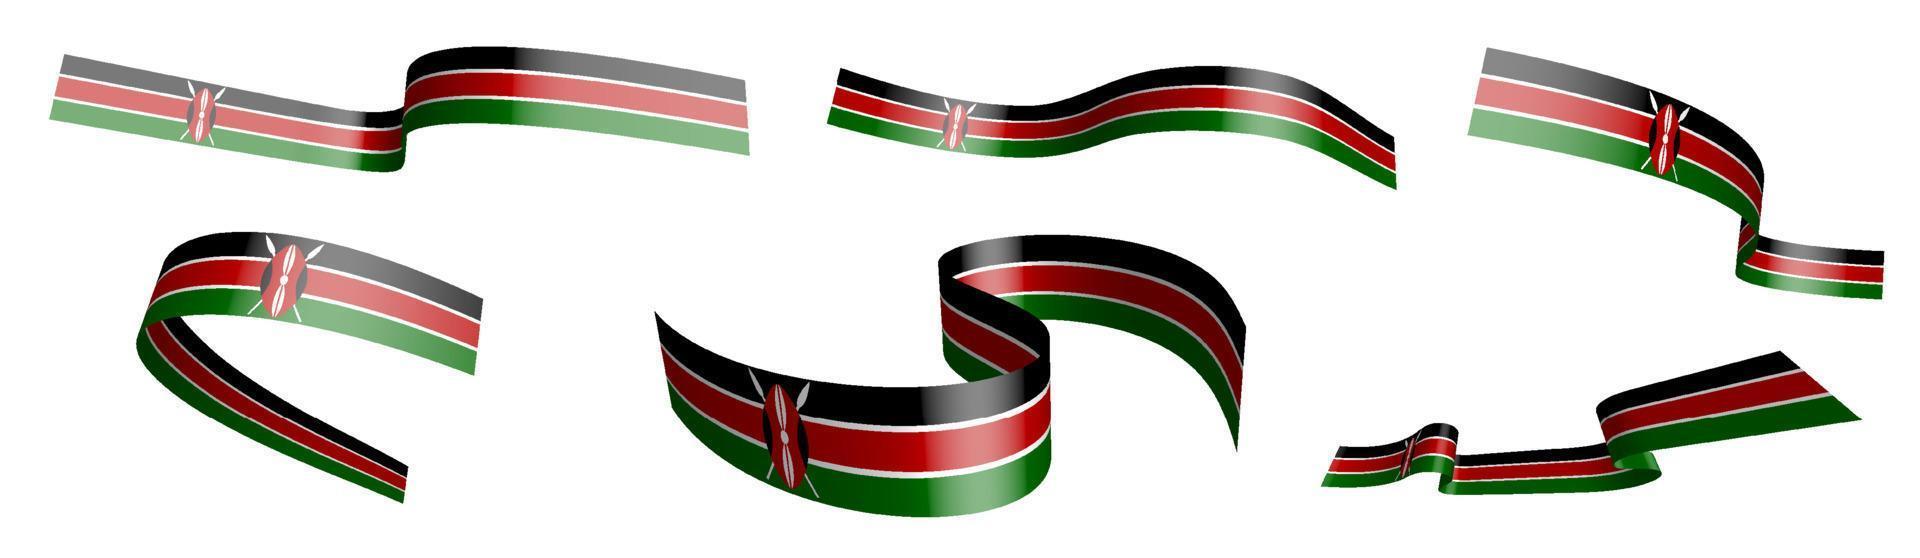 Set of holiday ribbons. Kenya flag waving in wind. Separation into lower and upper layers. Design element. Vector on white background